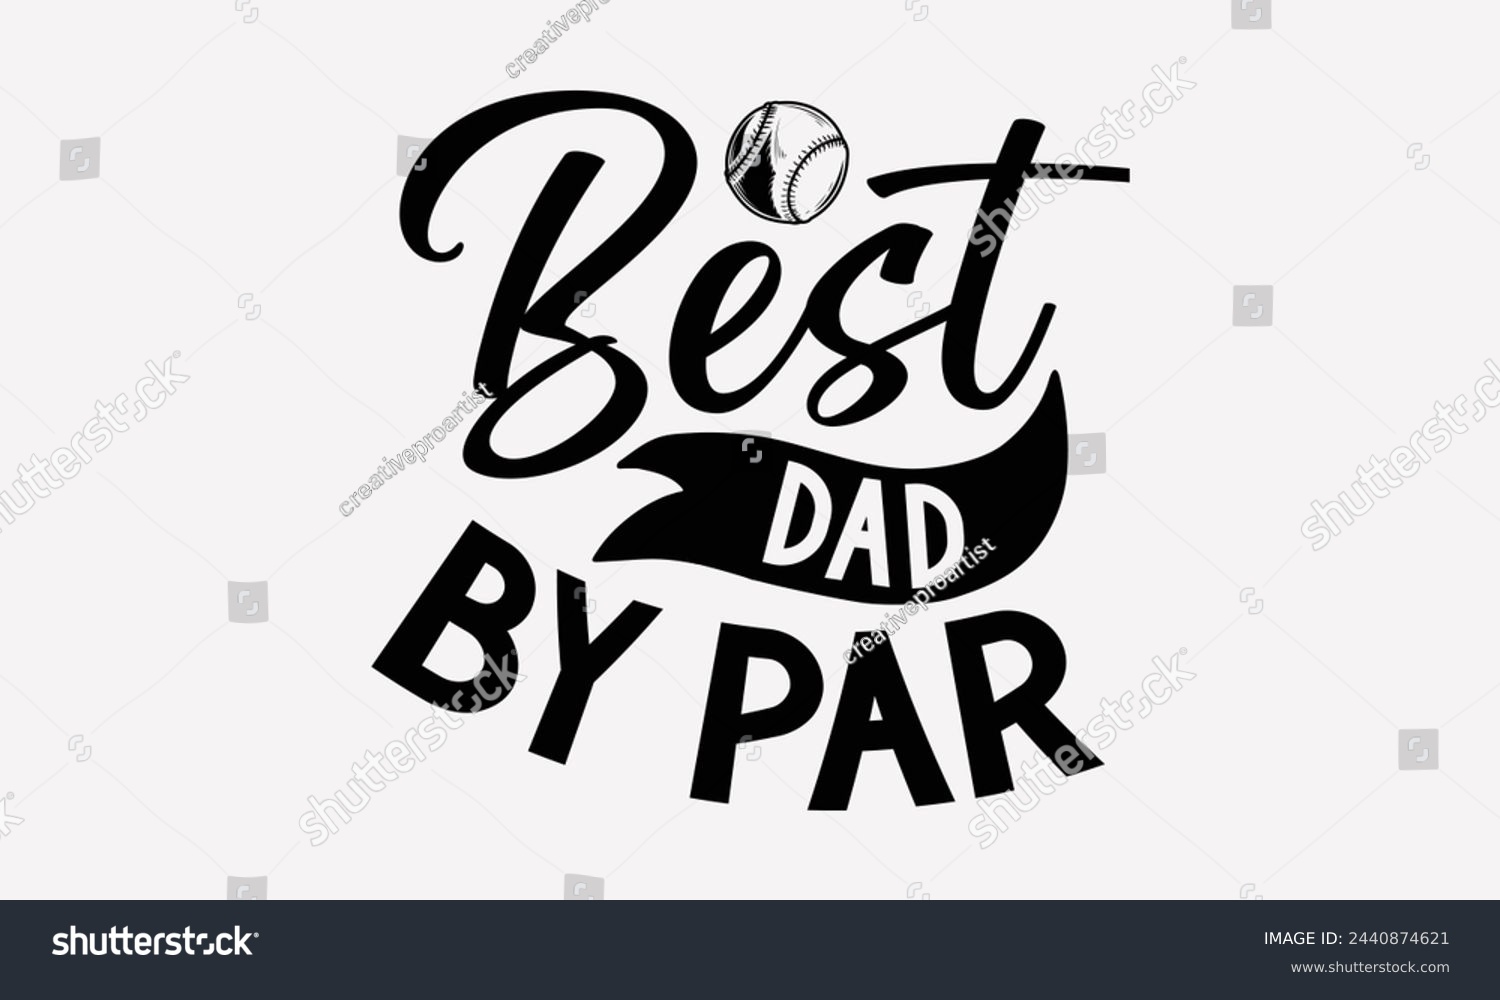 SVG of Best Dad By Par- Golf t- shirt design, Hand drawn lettering phrase isolated on white background, for Cutting Machine, Silhouette Cameo, Cricut, greeting card template with typography text svg